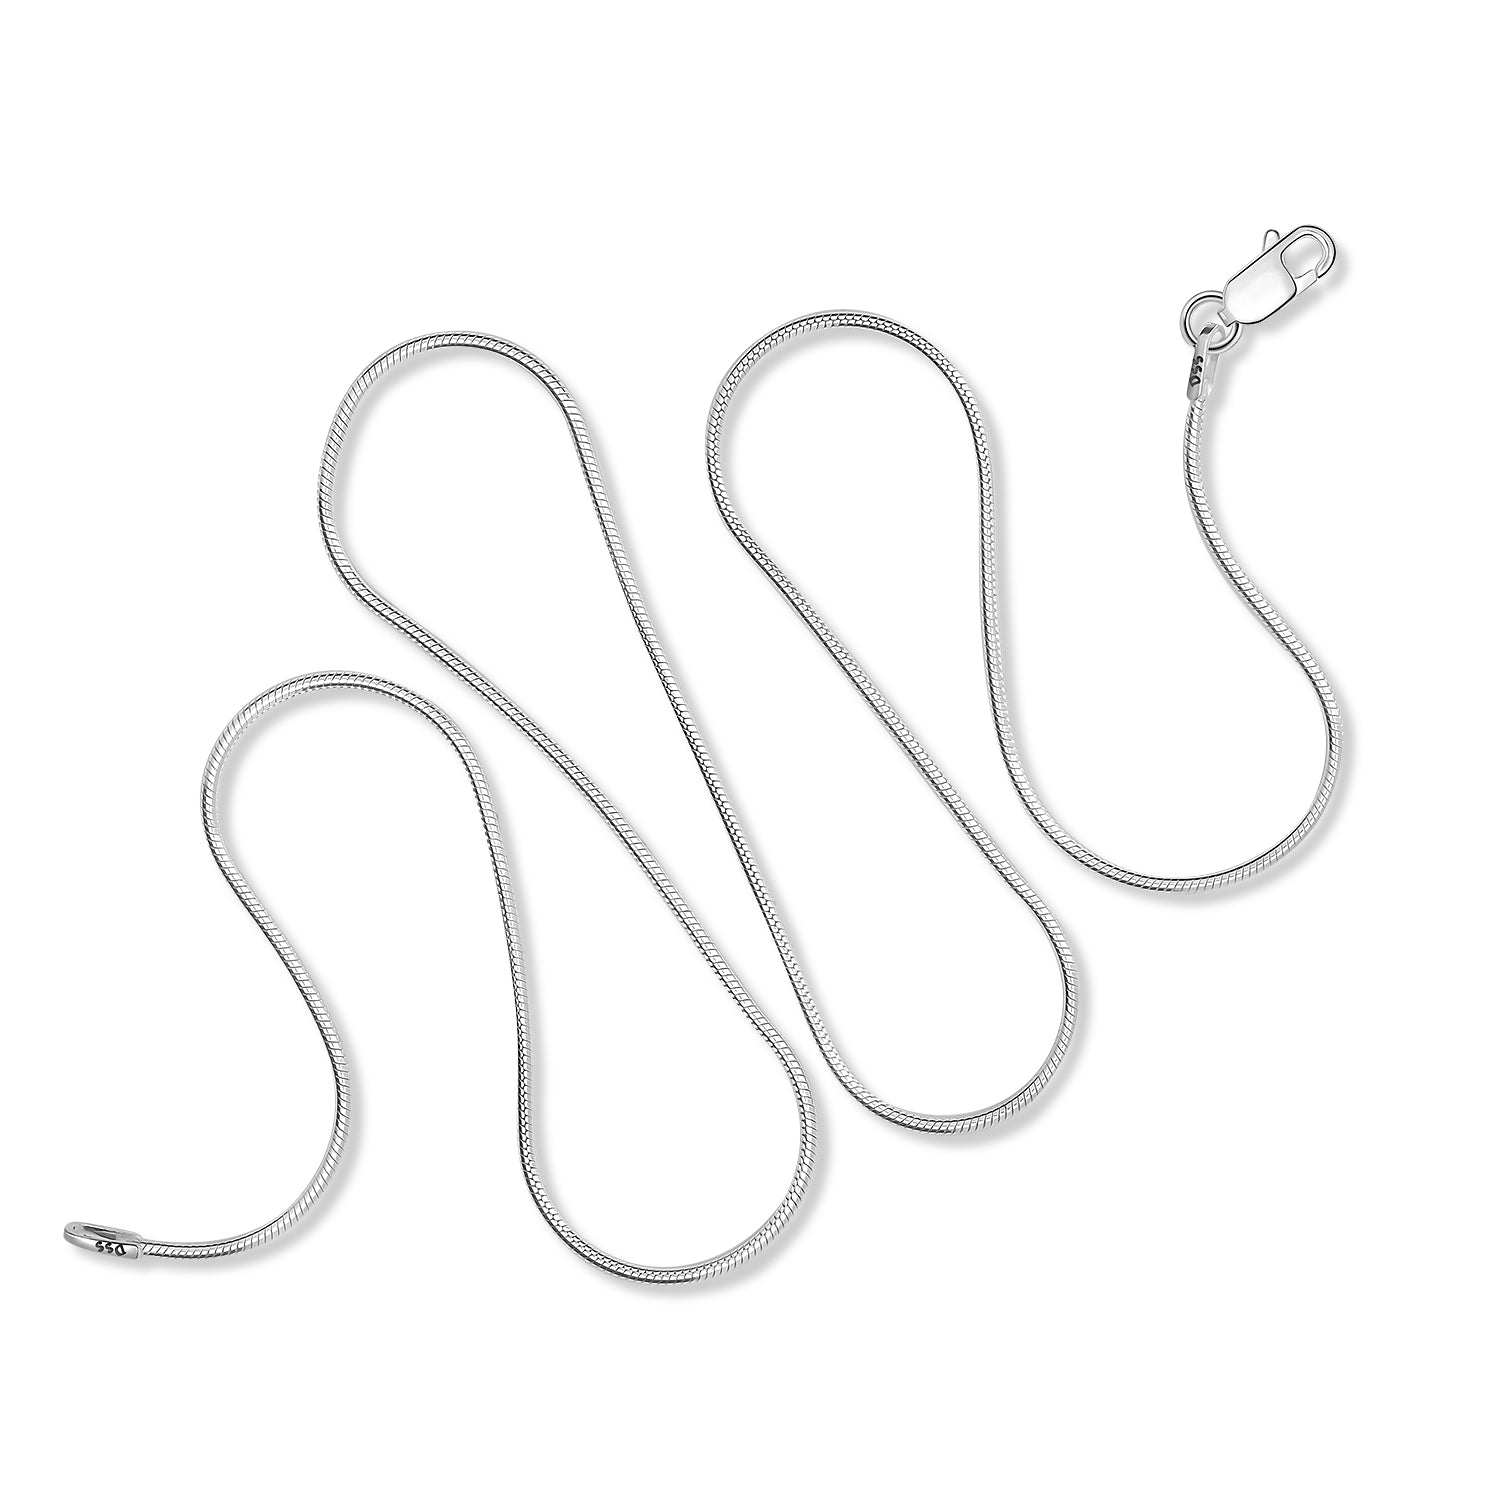 1MM Sterling Silver Snake Chain with Lobster Claw Clasp 16", 18", 20", 22', 24", 30". This is a perfect chain for pendants however we do not recommend sleeping in any sort of a snake chain.